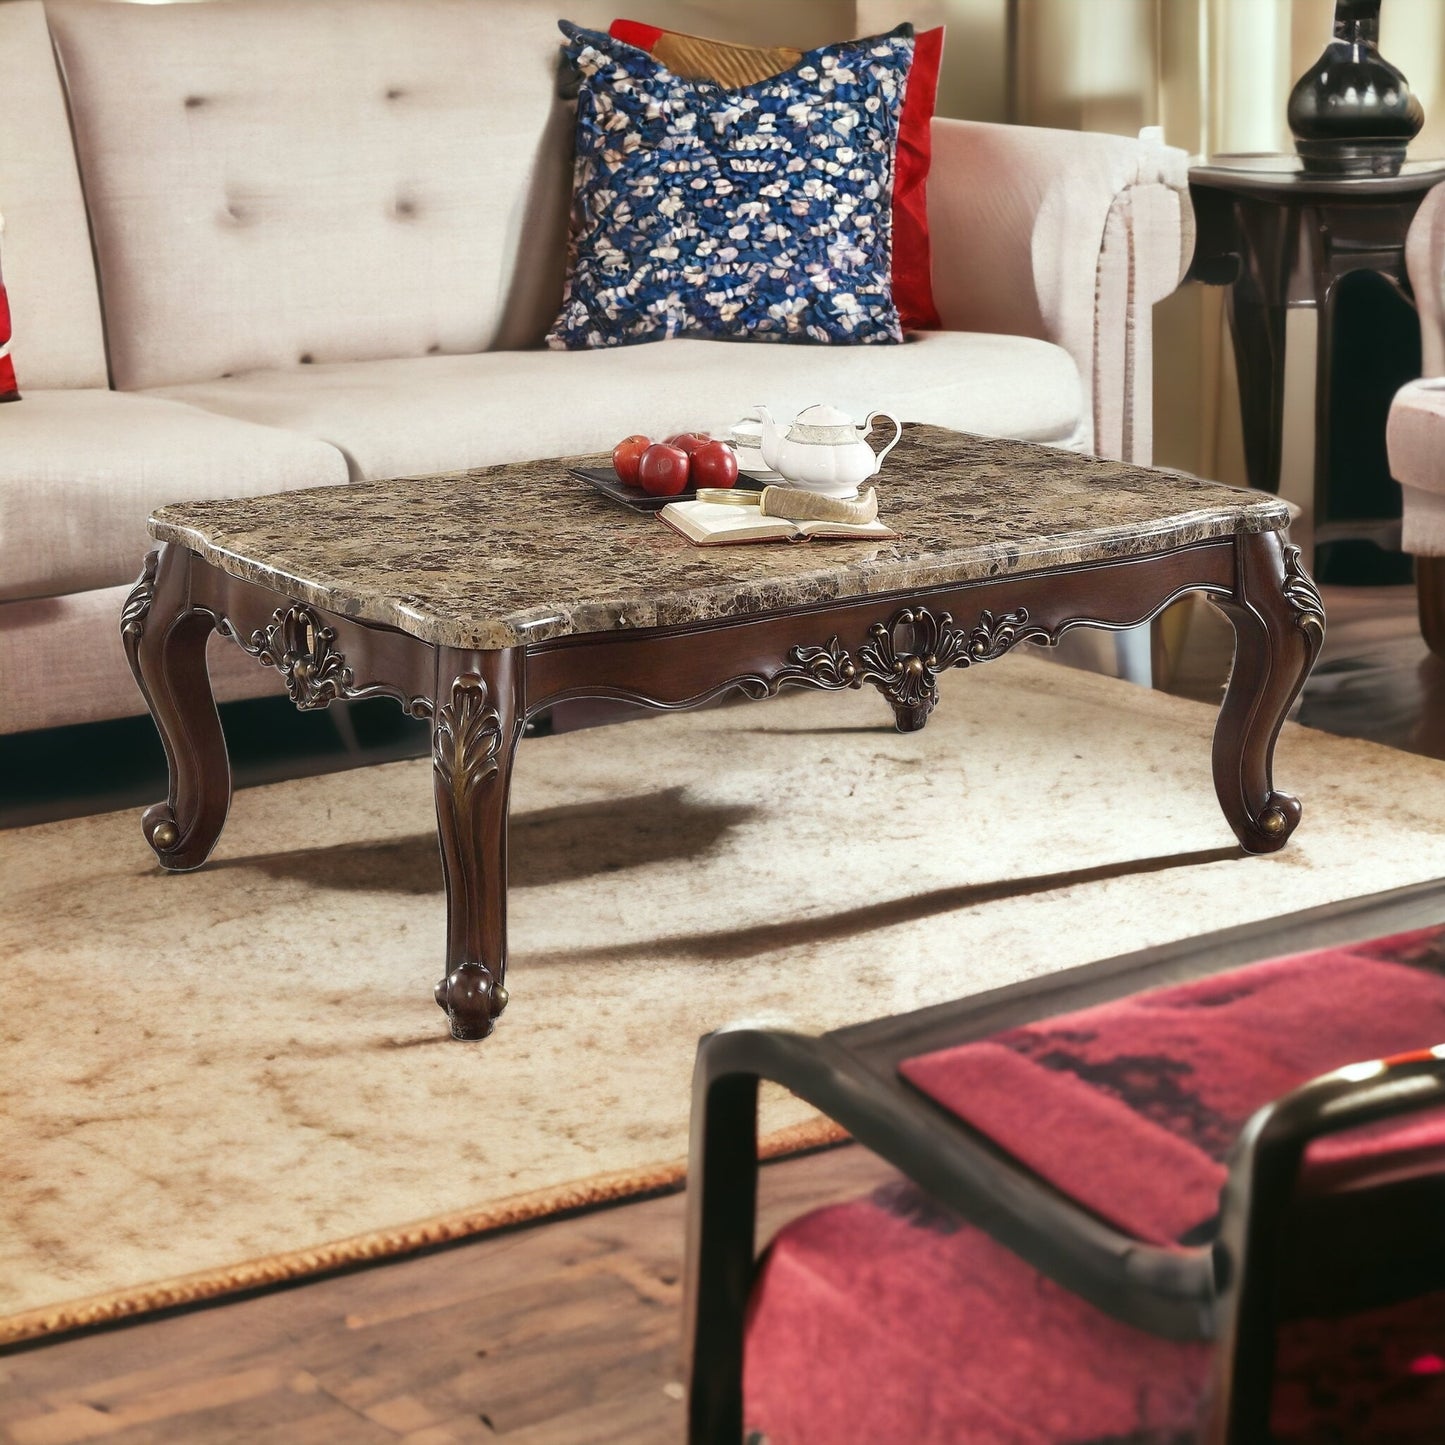 35" X 57" X 20" Marble Champagne Wood Coffee Table